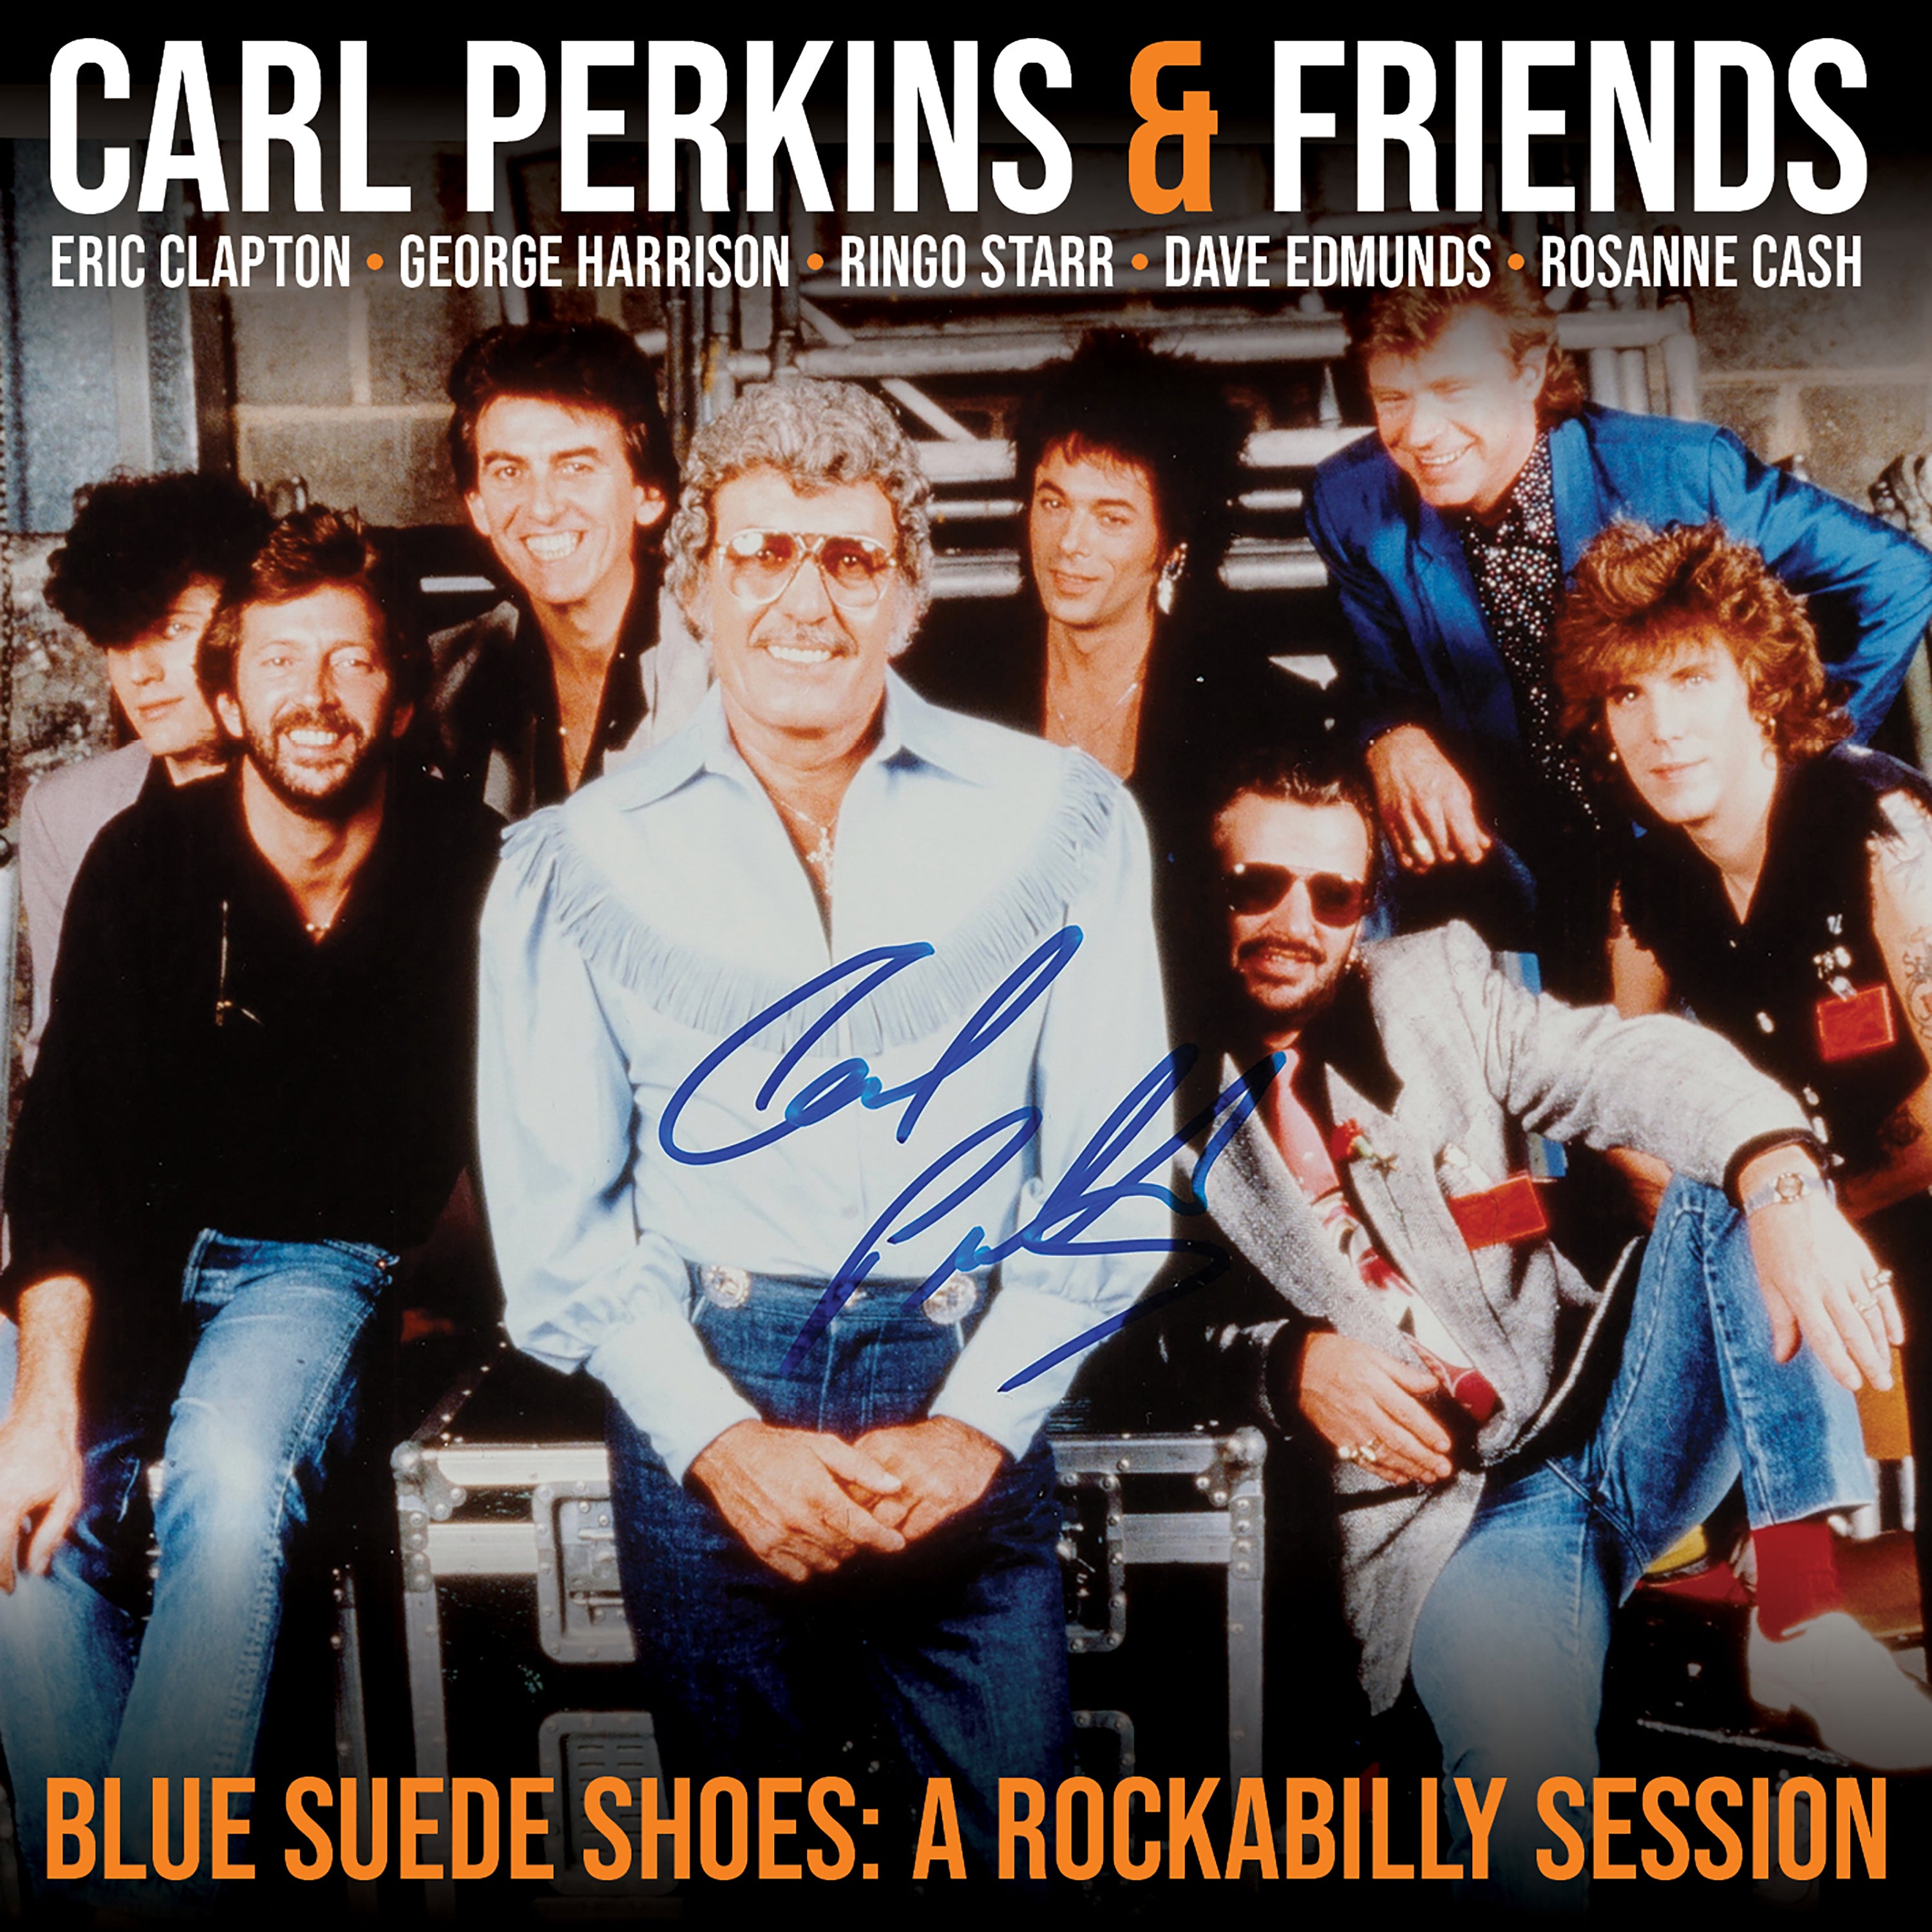 CARL PERKINS & FRIENDS - BLUE SUEDE SHOES, A ROCKABILLY SESSION